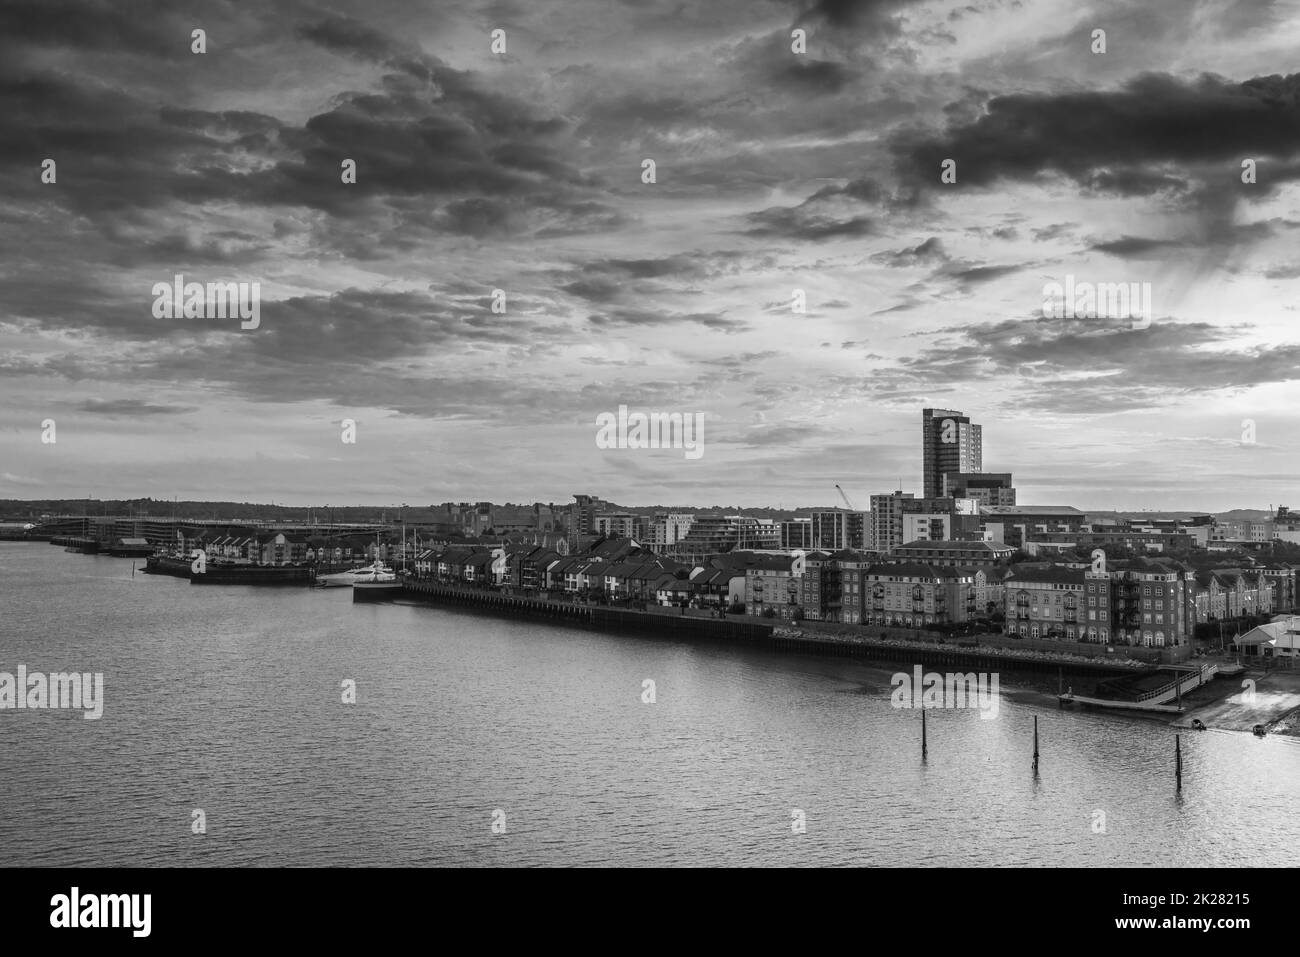 Black and white image of Ocean Village as seen from the Itchen Bridge, Southampton, England, UK Stock Photo